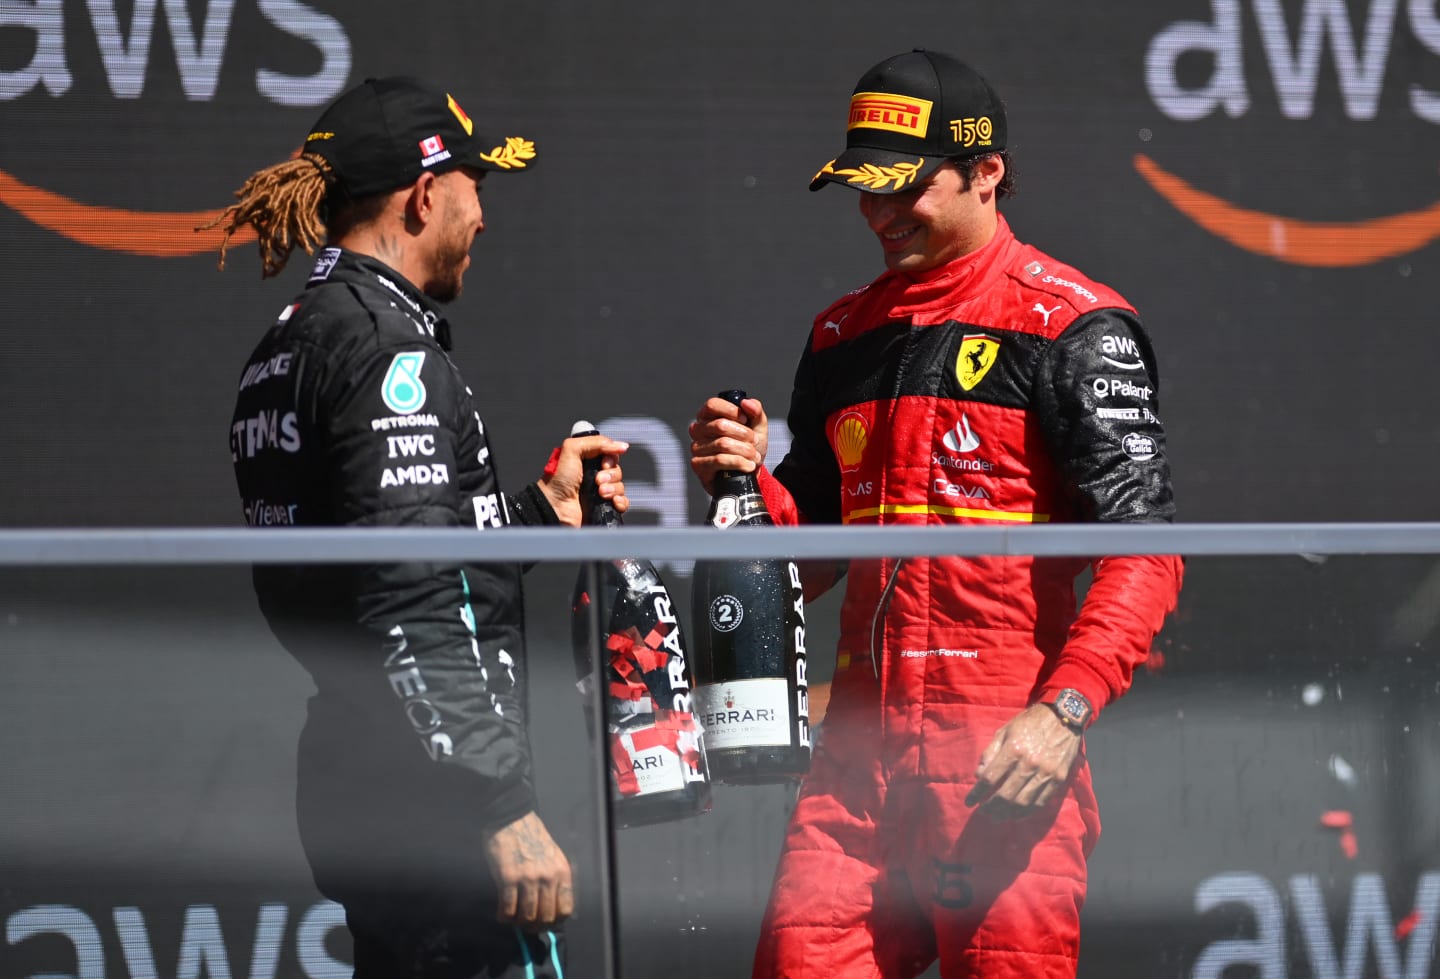 MONTREAL, QUEBEC - JUNE 19: Second placed Carlos Sainz of Spain and Ferrari and Third placed Lewis Hamilton of Great Britain and Mercedes celebrate on the podium during the F1 Grand Prix of Canada at Circuit Gilles Villeneuve on June 19, 2022 in Montreal, Quebec. (Photo by Dan Mullan/Getty Images)